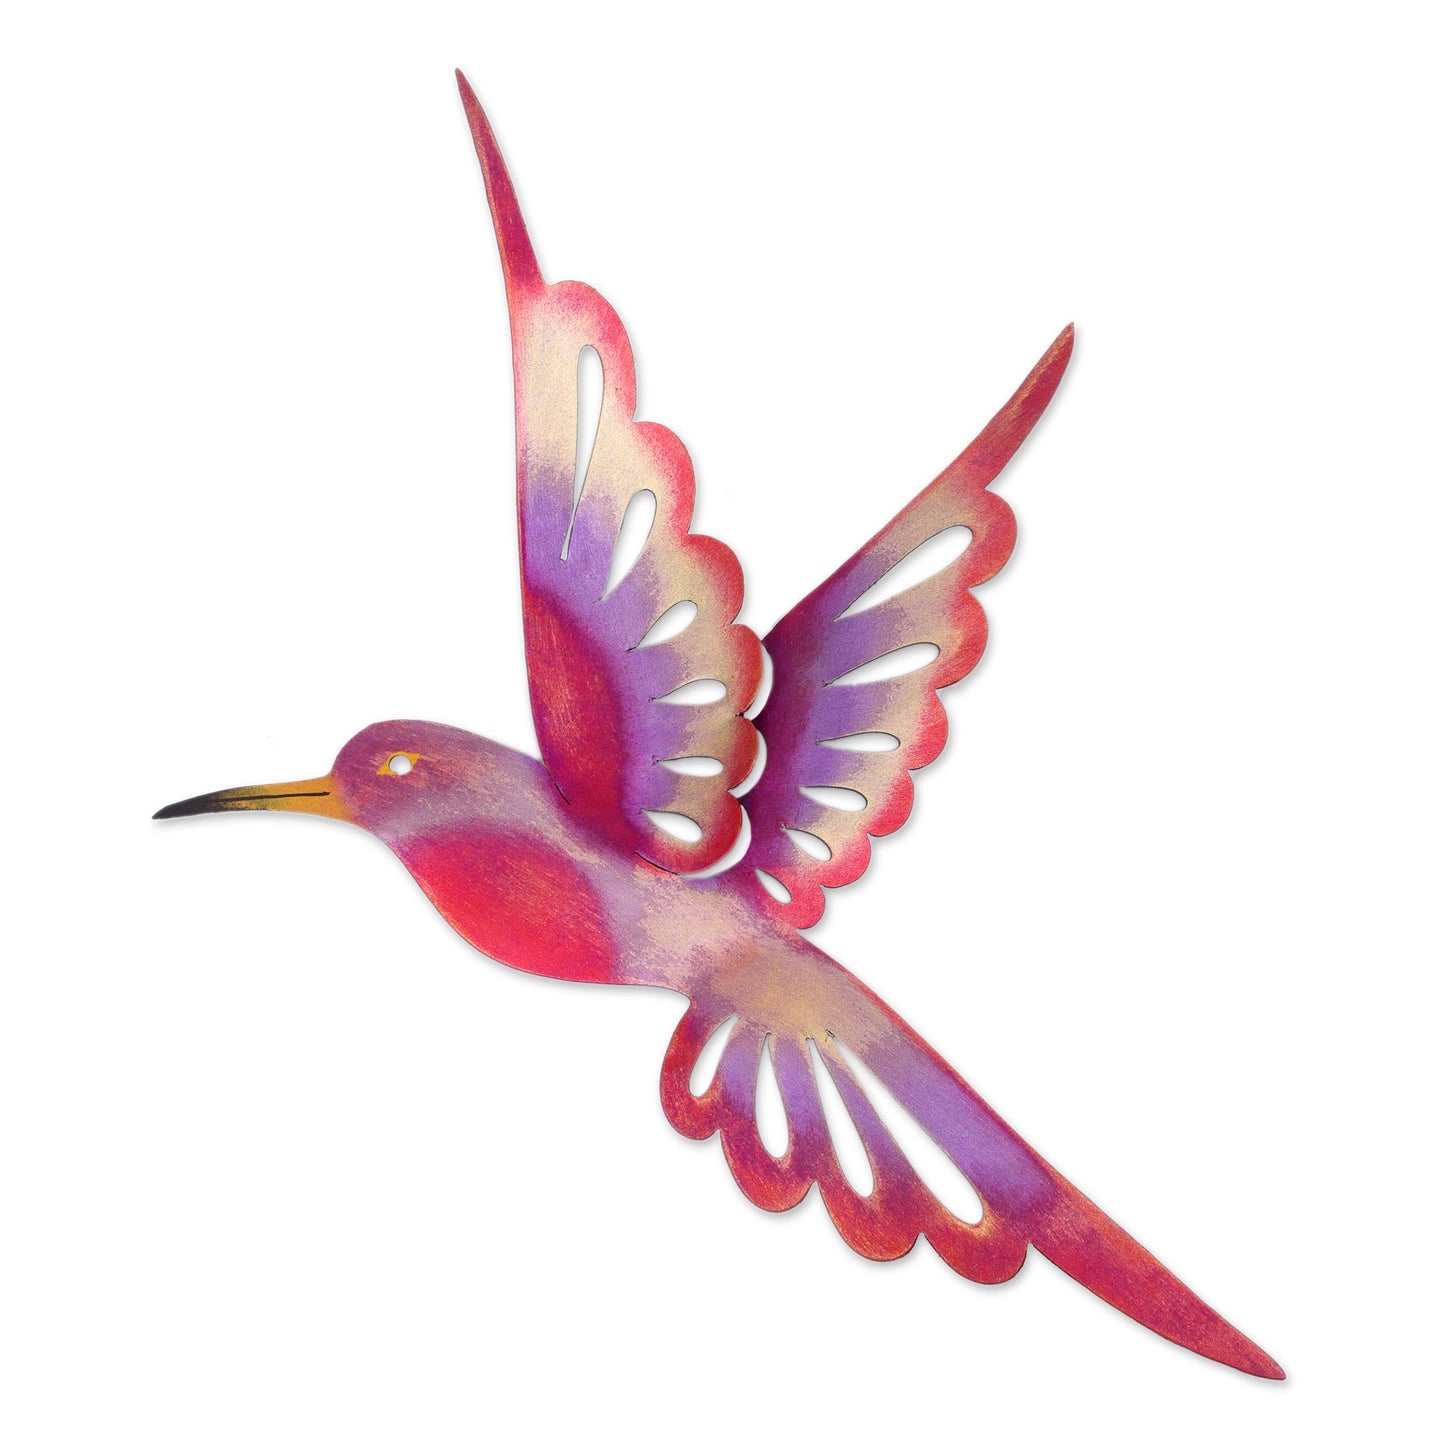 Violet Hummingbird Bird-Themed Steel Wall Sculpture in Pink from Mexico (Large)